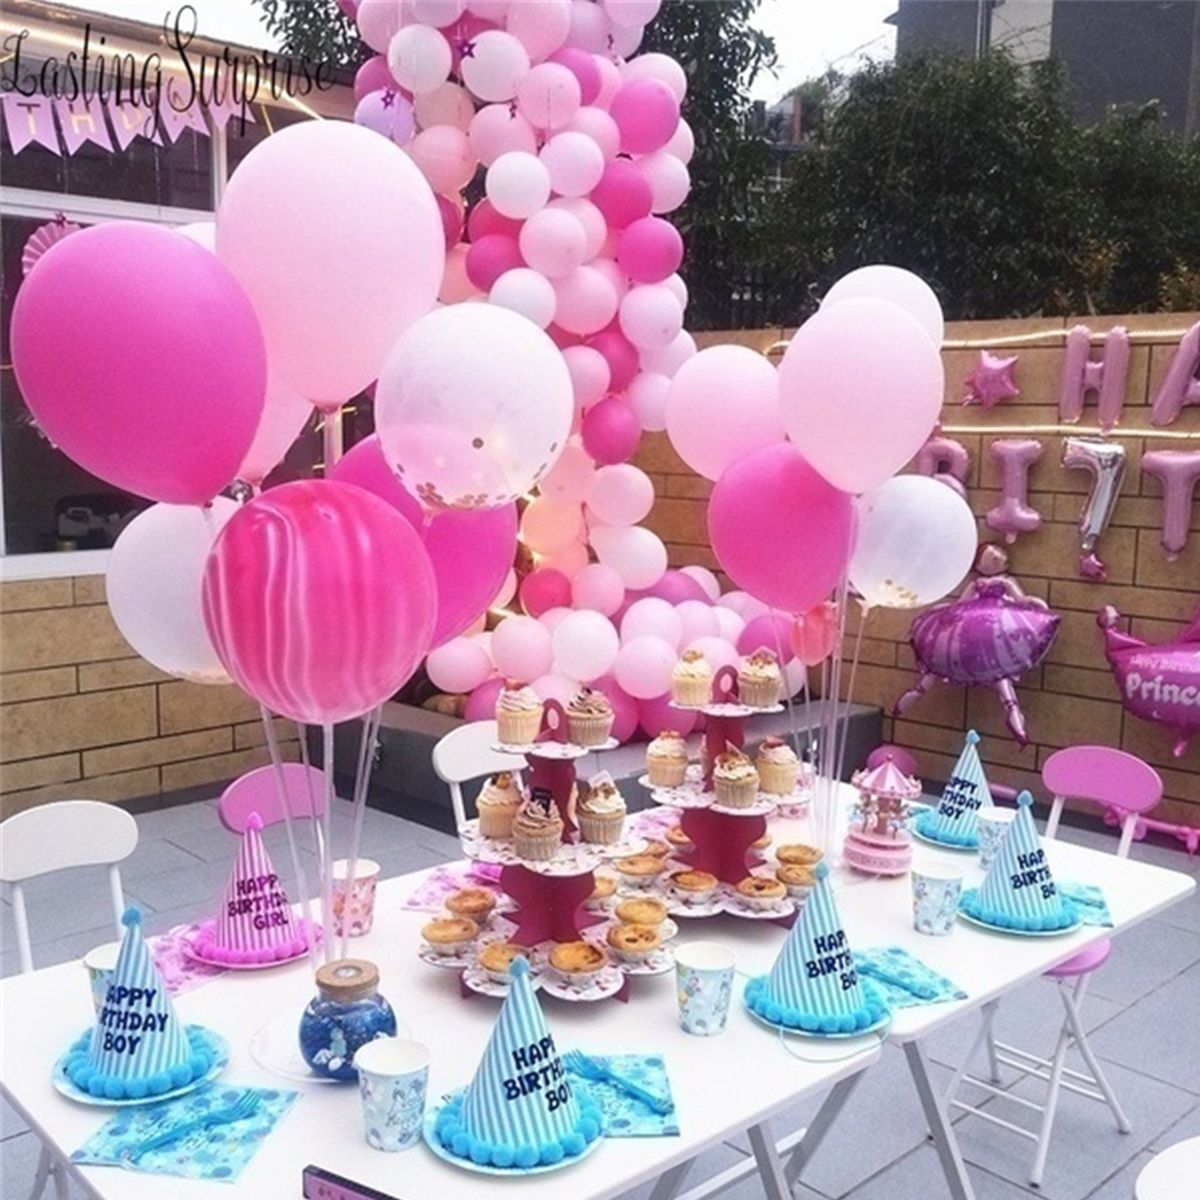 LED-Plastic-Balloon-Stand-Base-Clear-Balloon-Stand-Birthday-Wedding-Party-Decorations-1599596